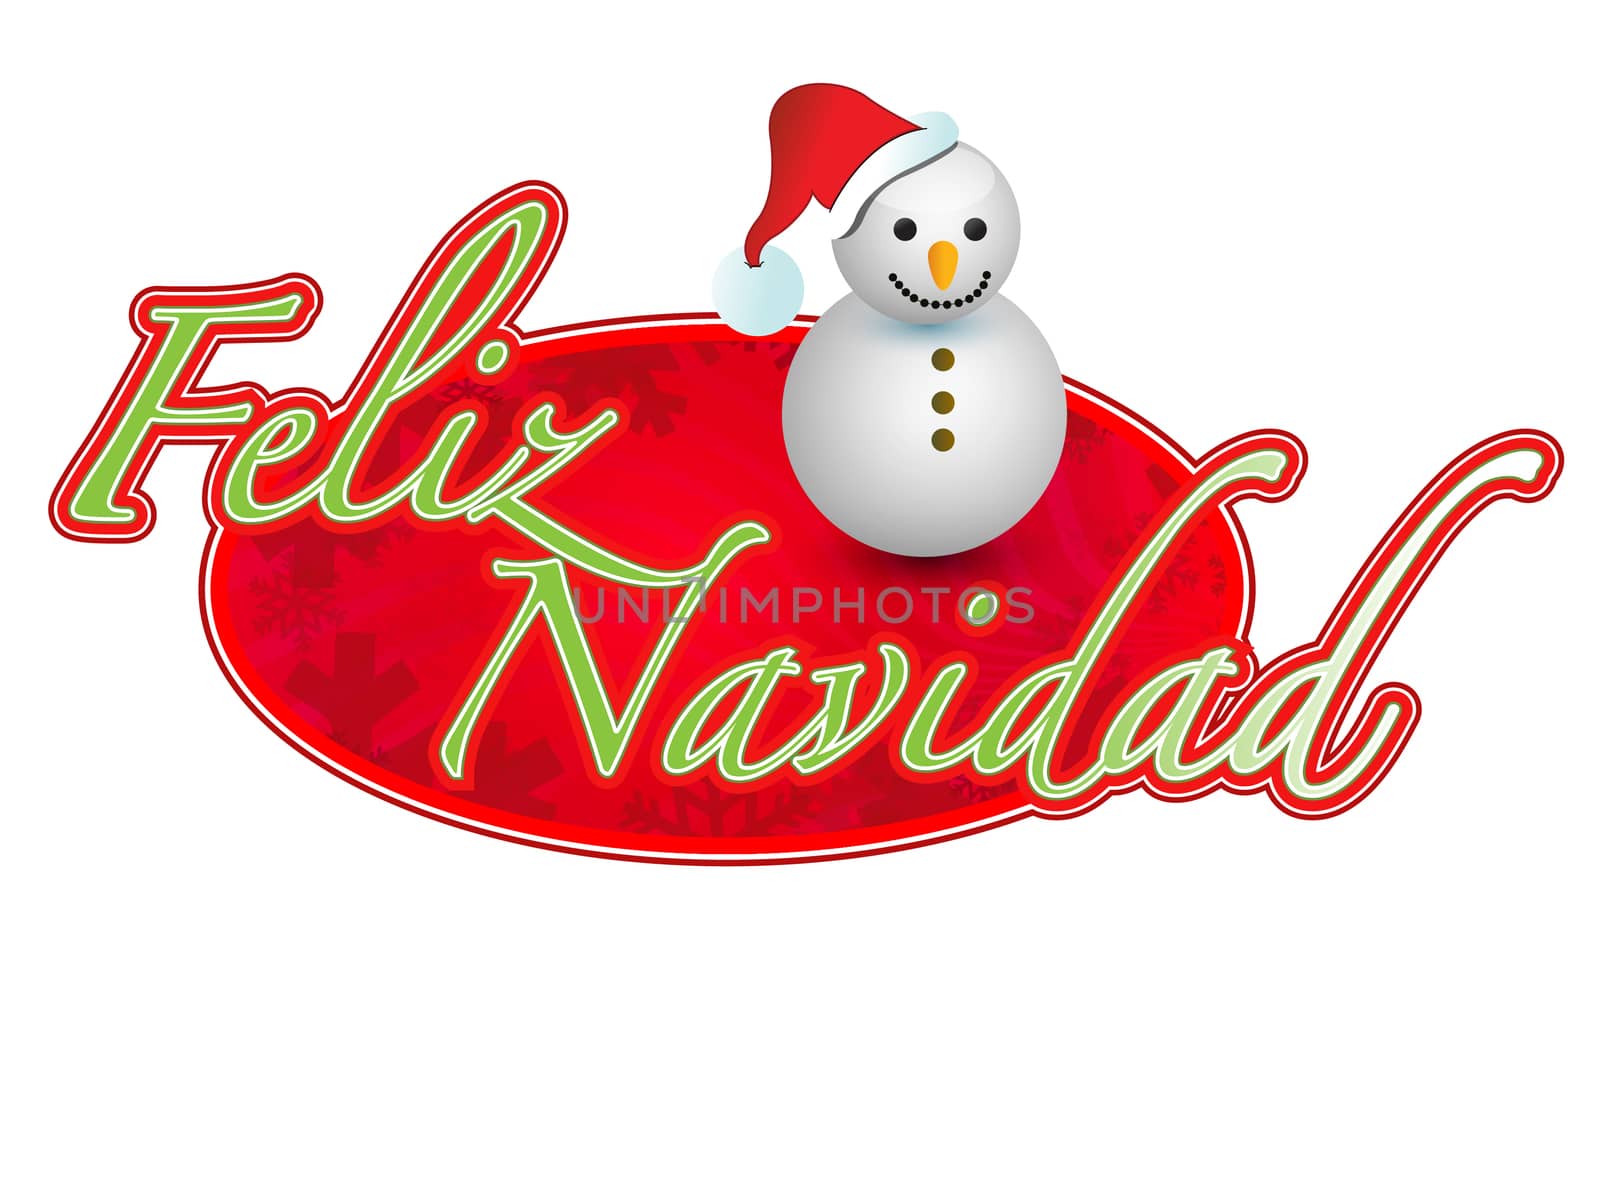 Spanish - merry christmas snowman sign illustration design by alexmillos